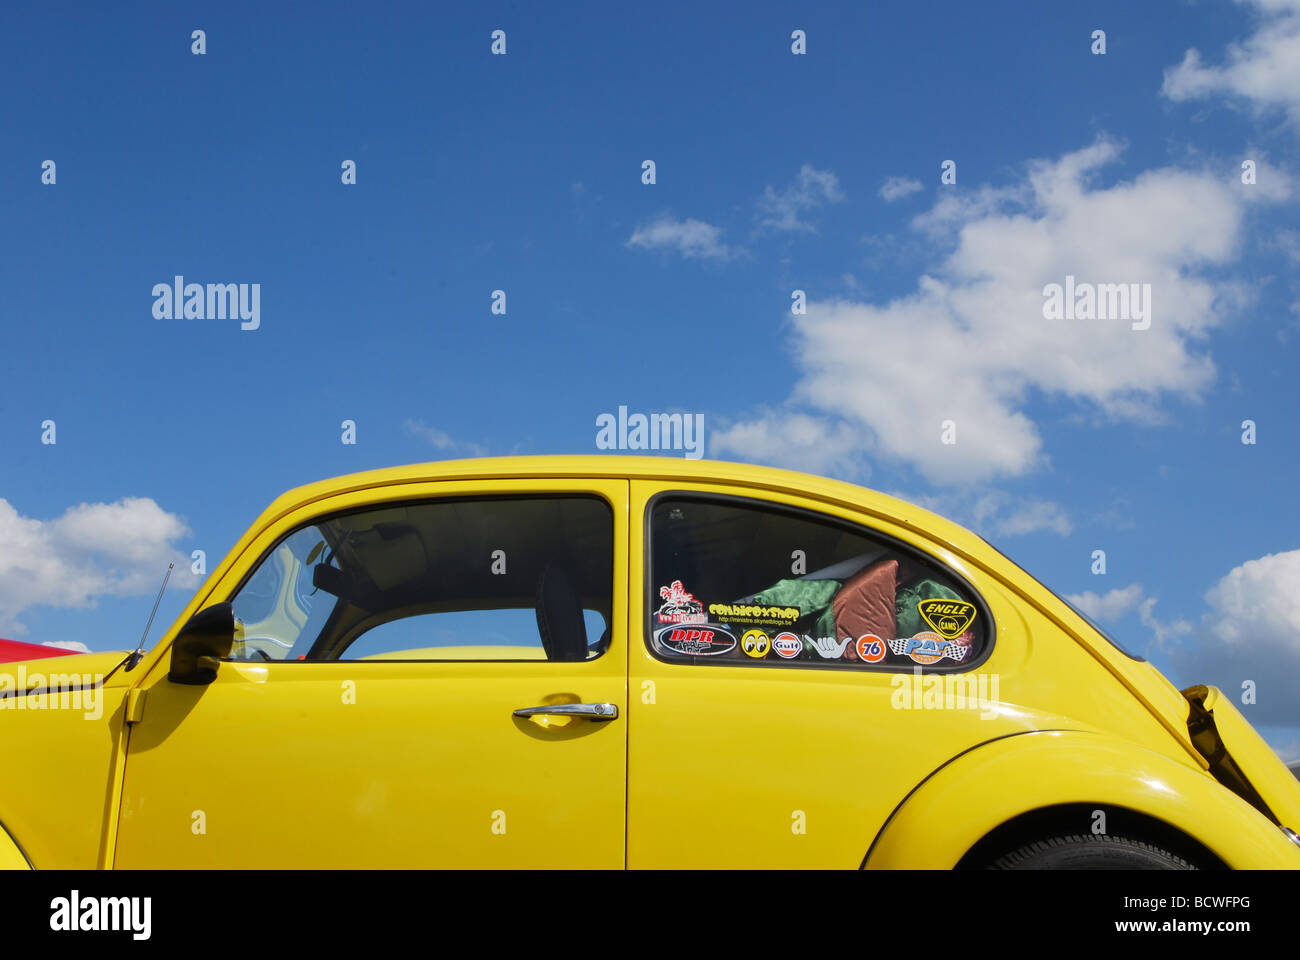 Classic yellow VW beetle against blue skies Stock Photo